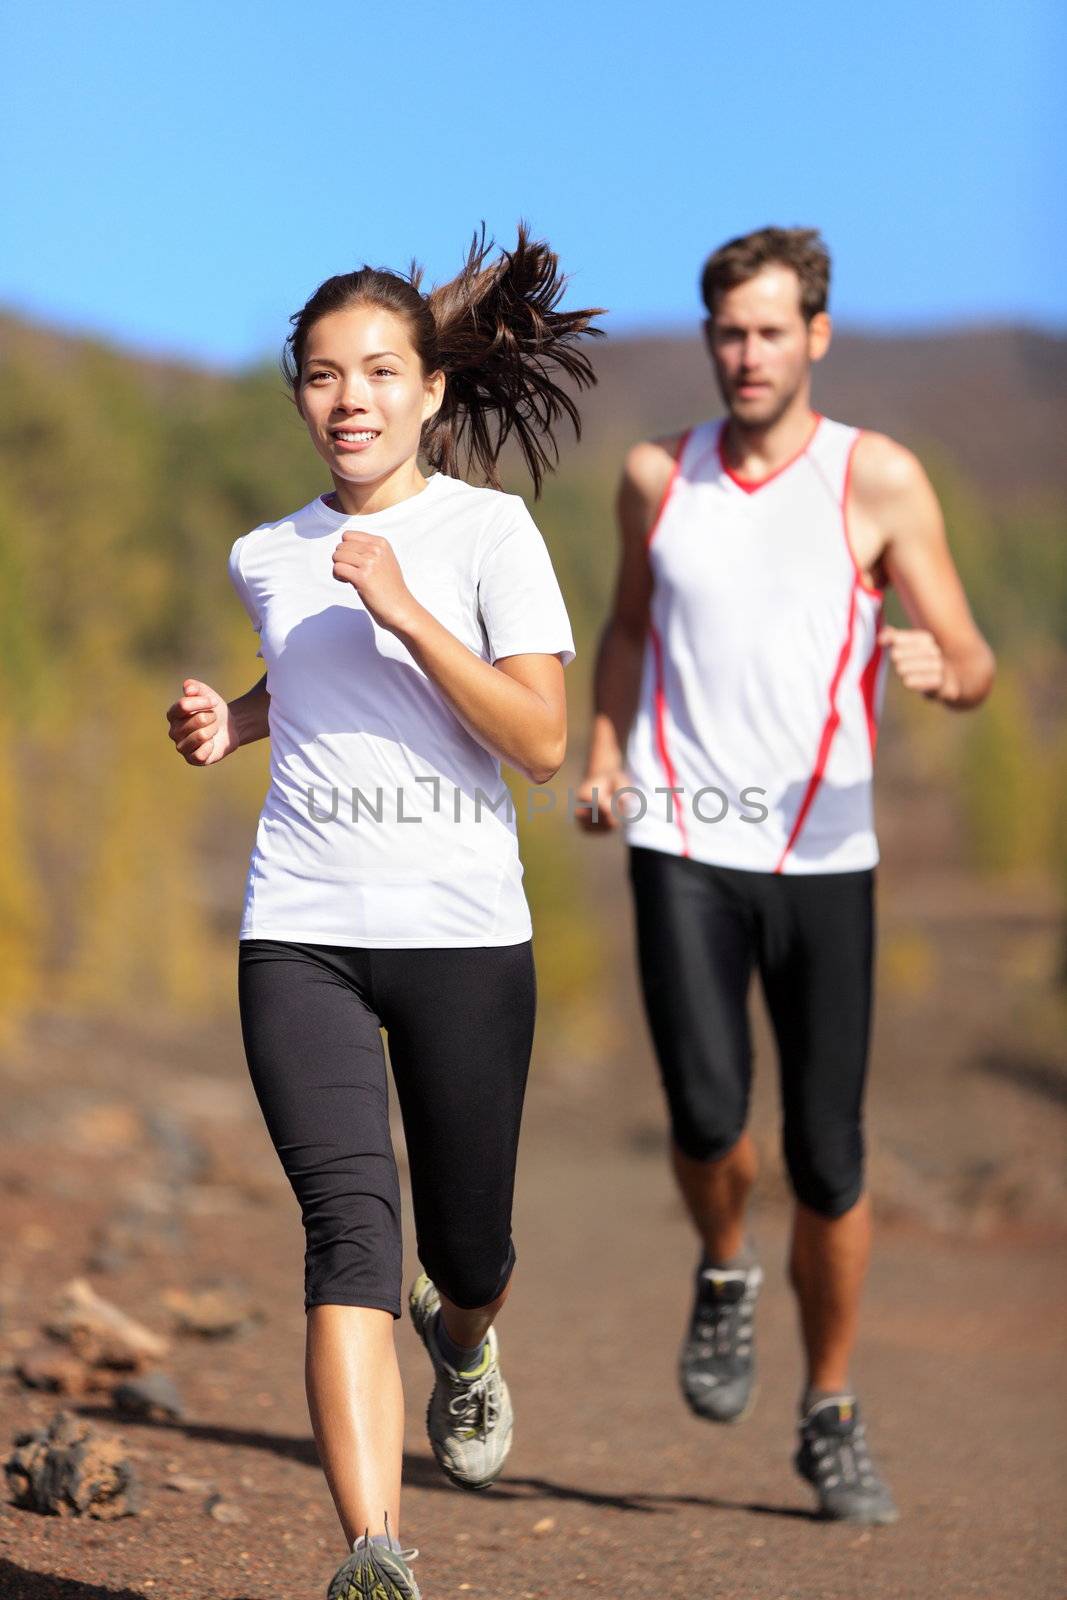 Young couple running together outdoors in beautiful volcanic landscape. Woman trail runner training for marathon run with male model jogging in background.